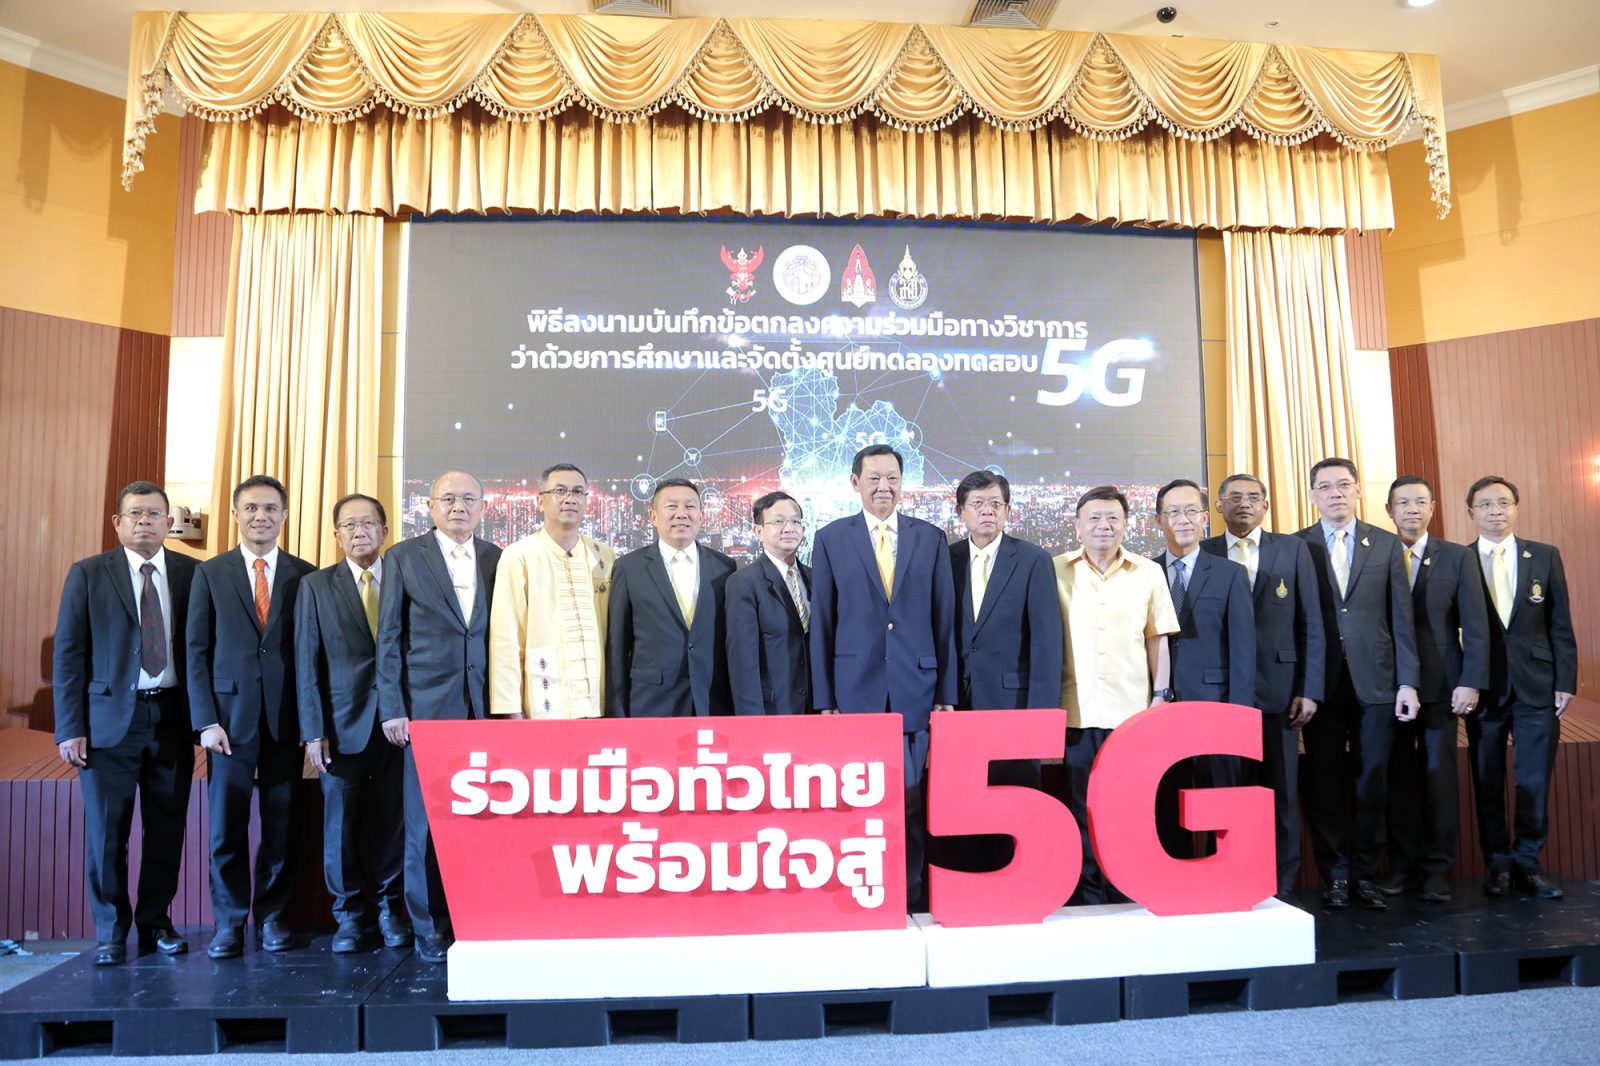 KKU joins 2 leading universities – CMU and PSU - to set up a 5G Testing Center that will lay a basis for development of Thai technologies